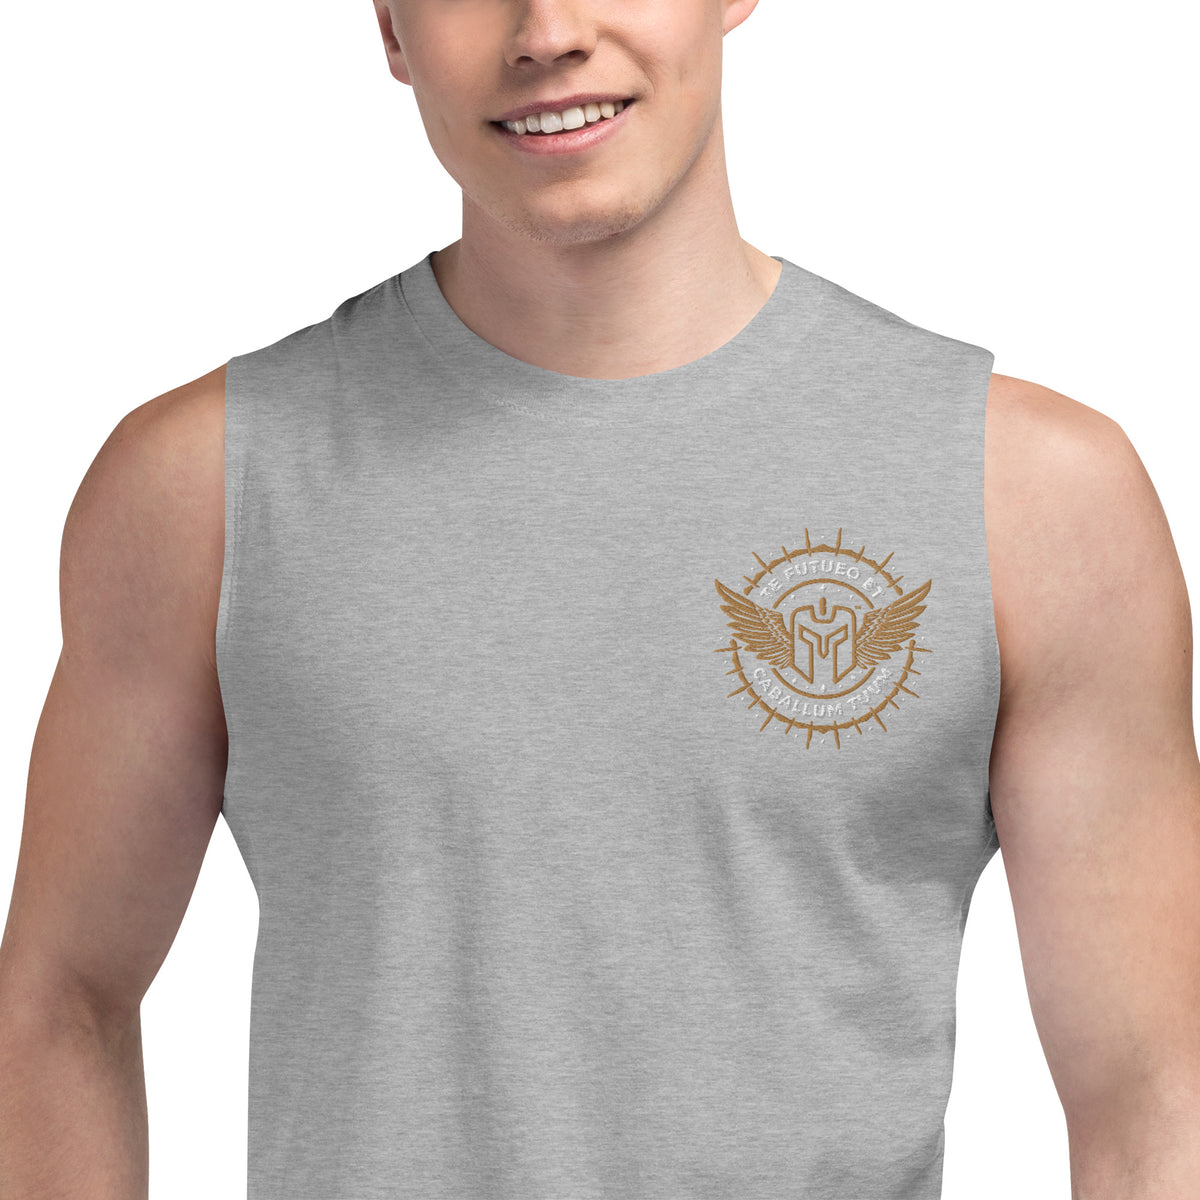 Te Futueo Et Caballum Tuum (Latin - Screw you, and the horse you rode in on) Muscle Shirt